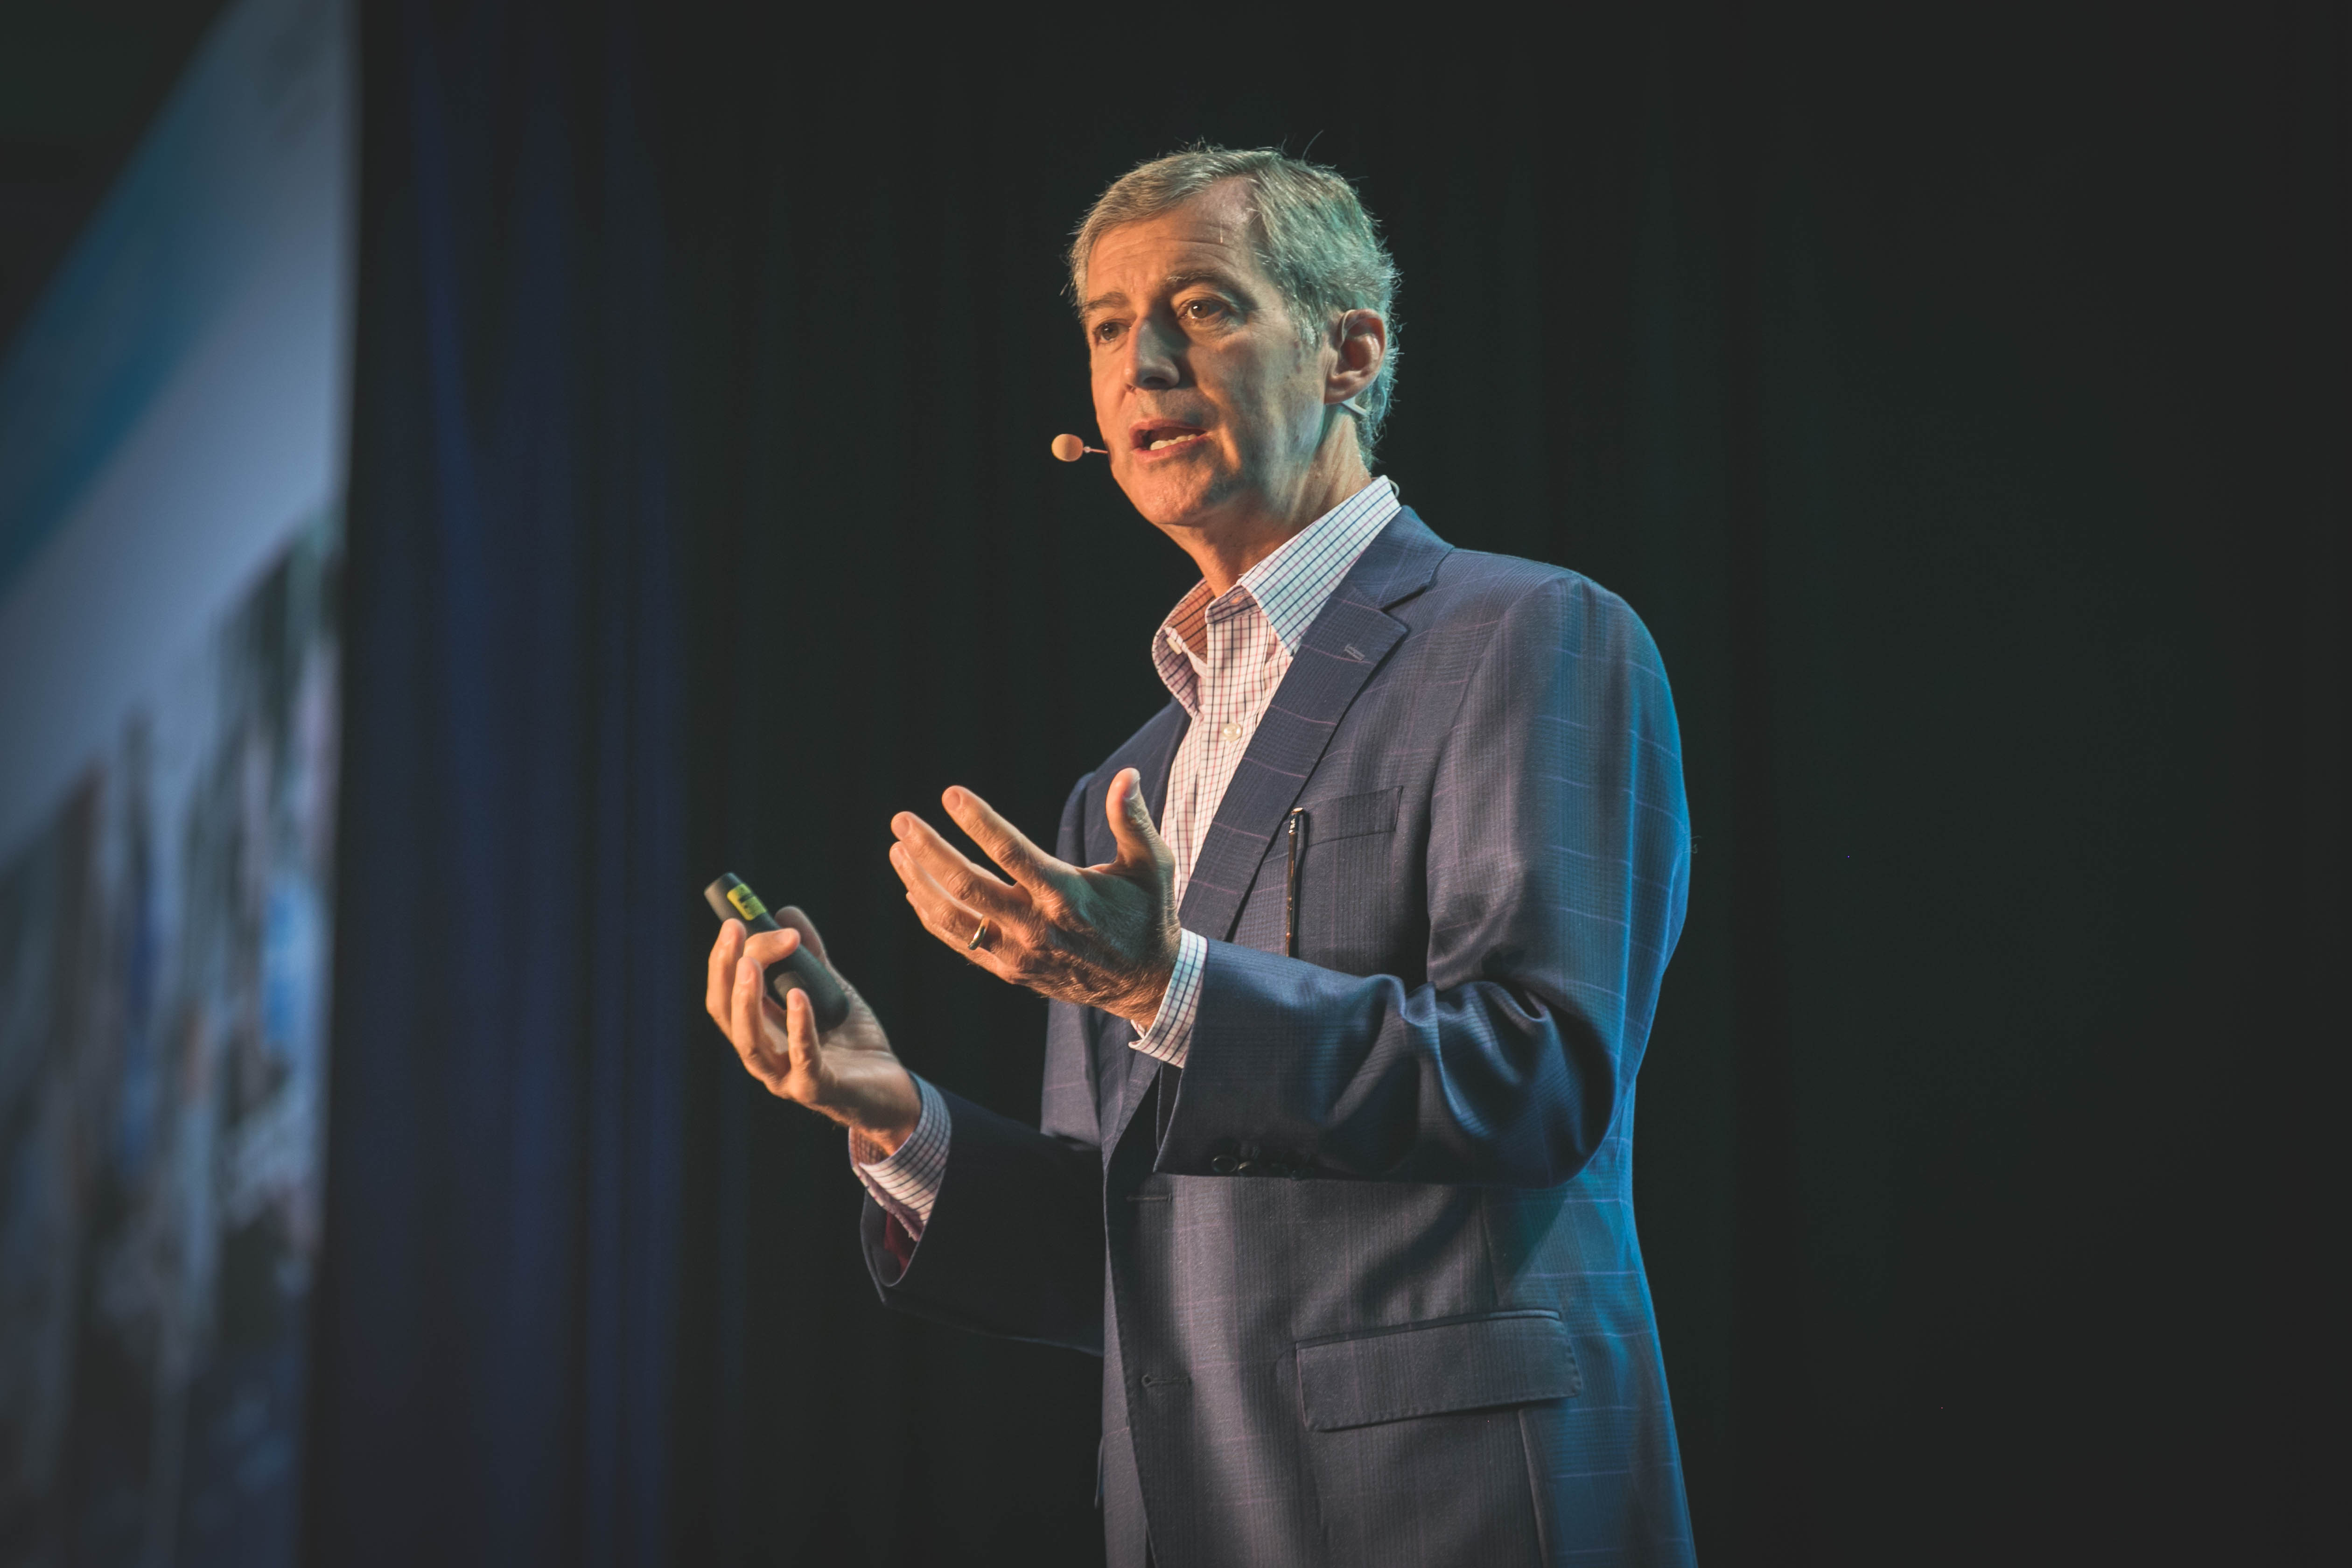 Cox Automotive Executive Vice President and Chief Operating Office Mark O’Neil delivers a keynote address on the future of connected retail for the company and the industry.